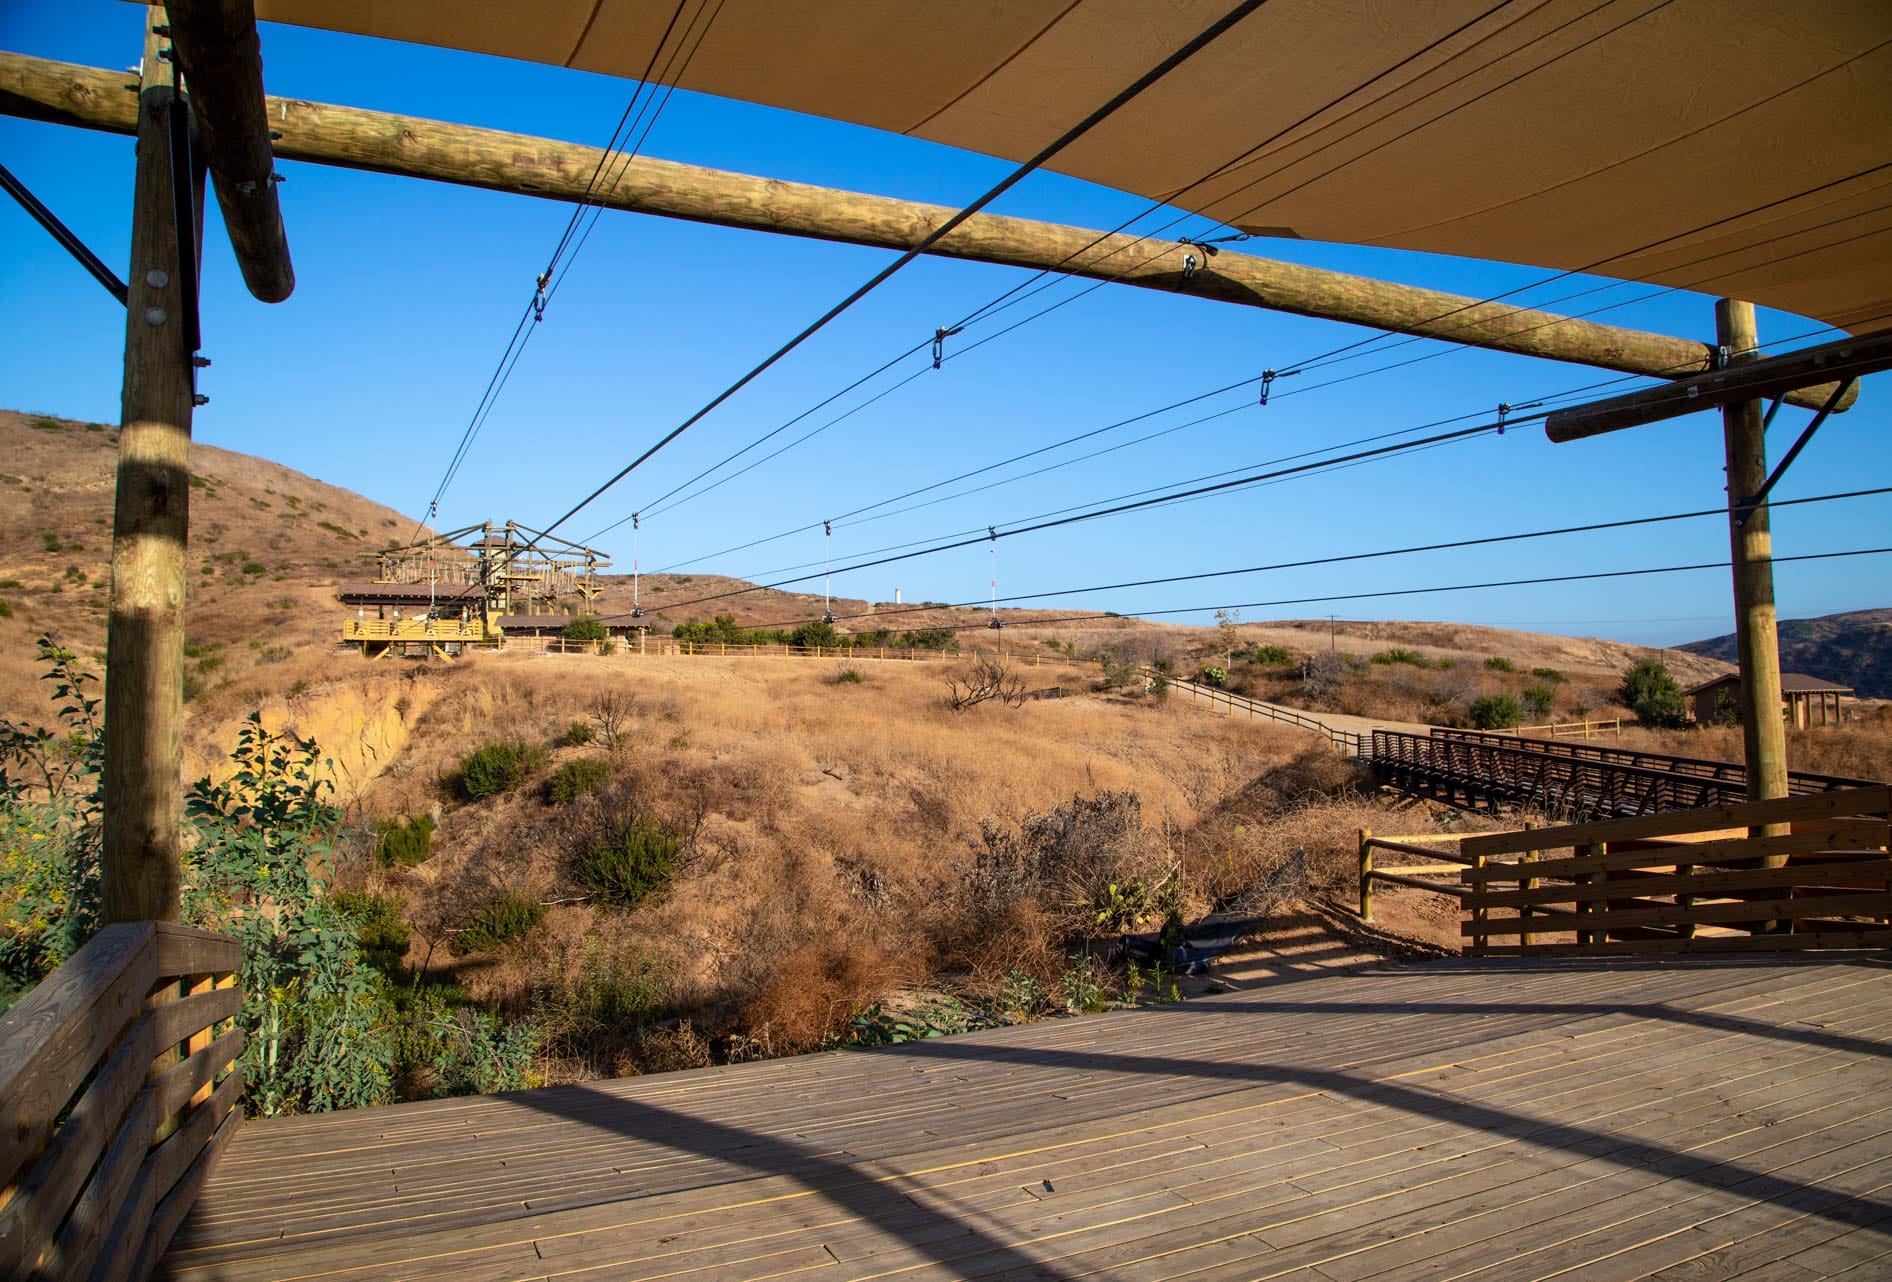 View of the zip line at the Adventure Hill challenge course